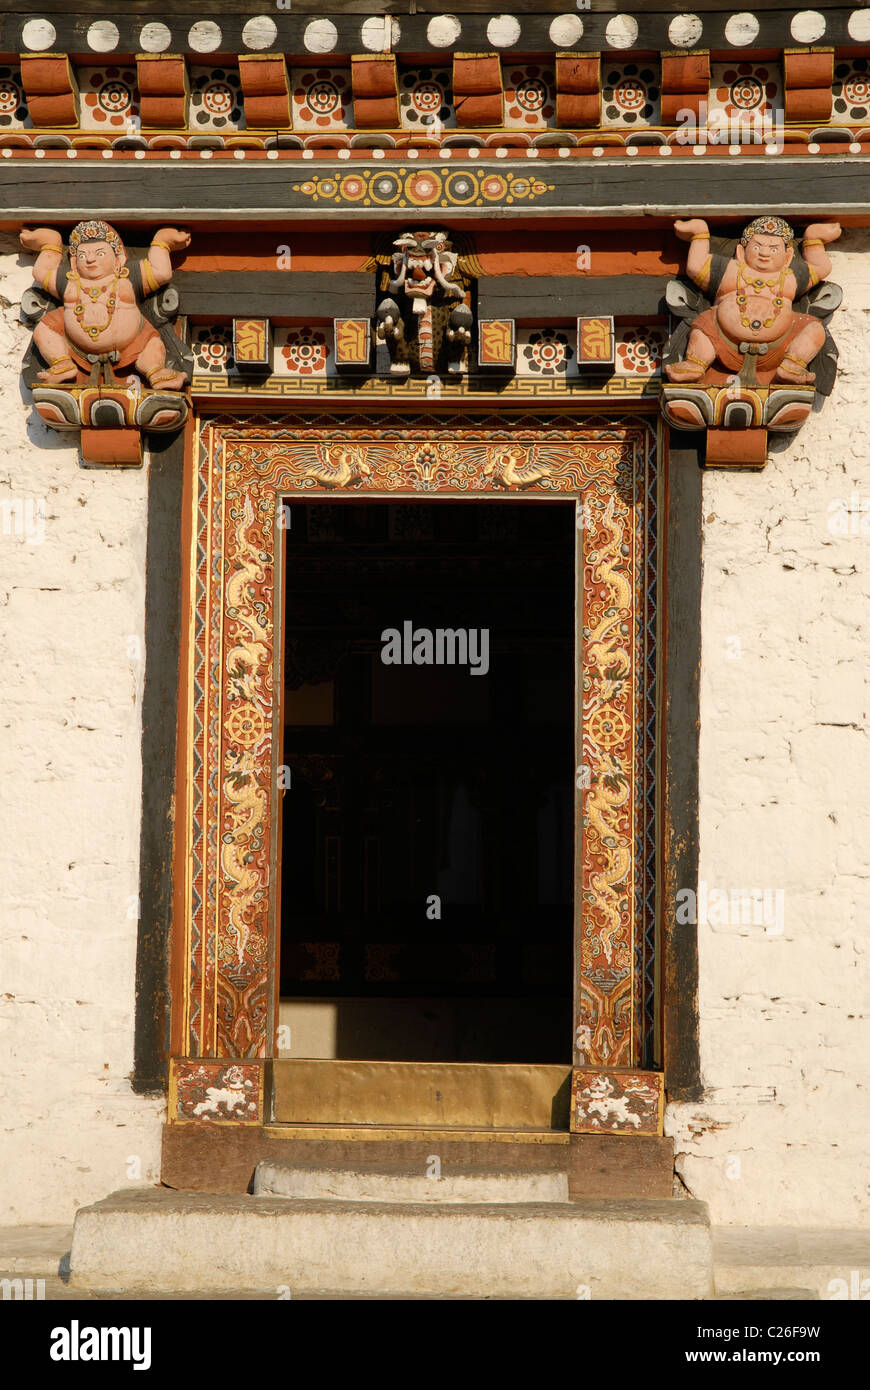 Wood carvings at an entrance to the inner building,Tashichhodzong, Thimphu, Bhutan Stock Photo